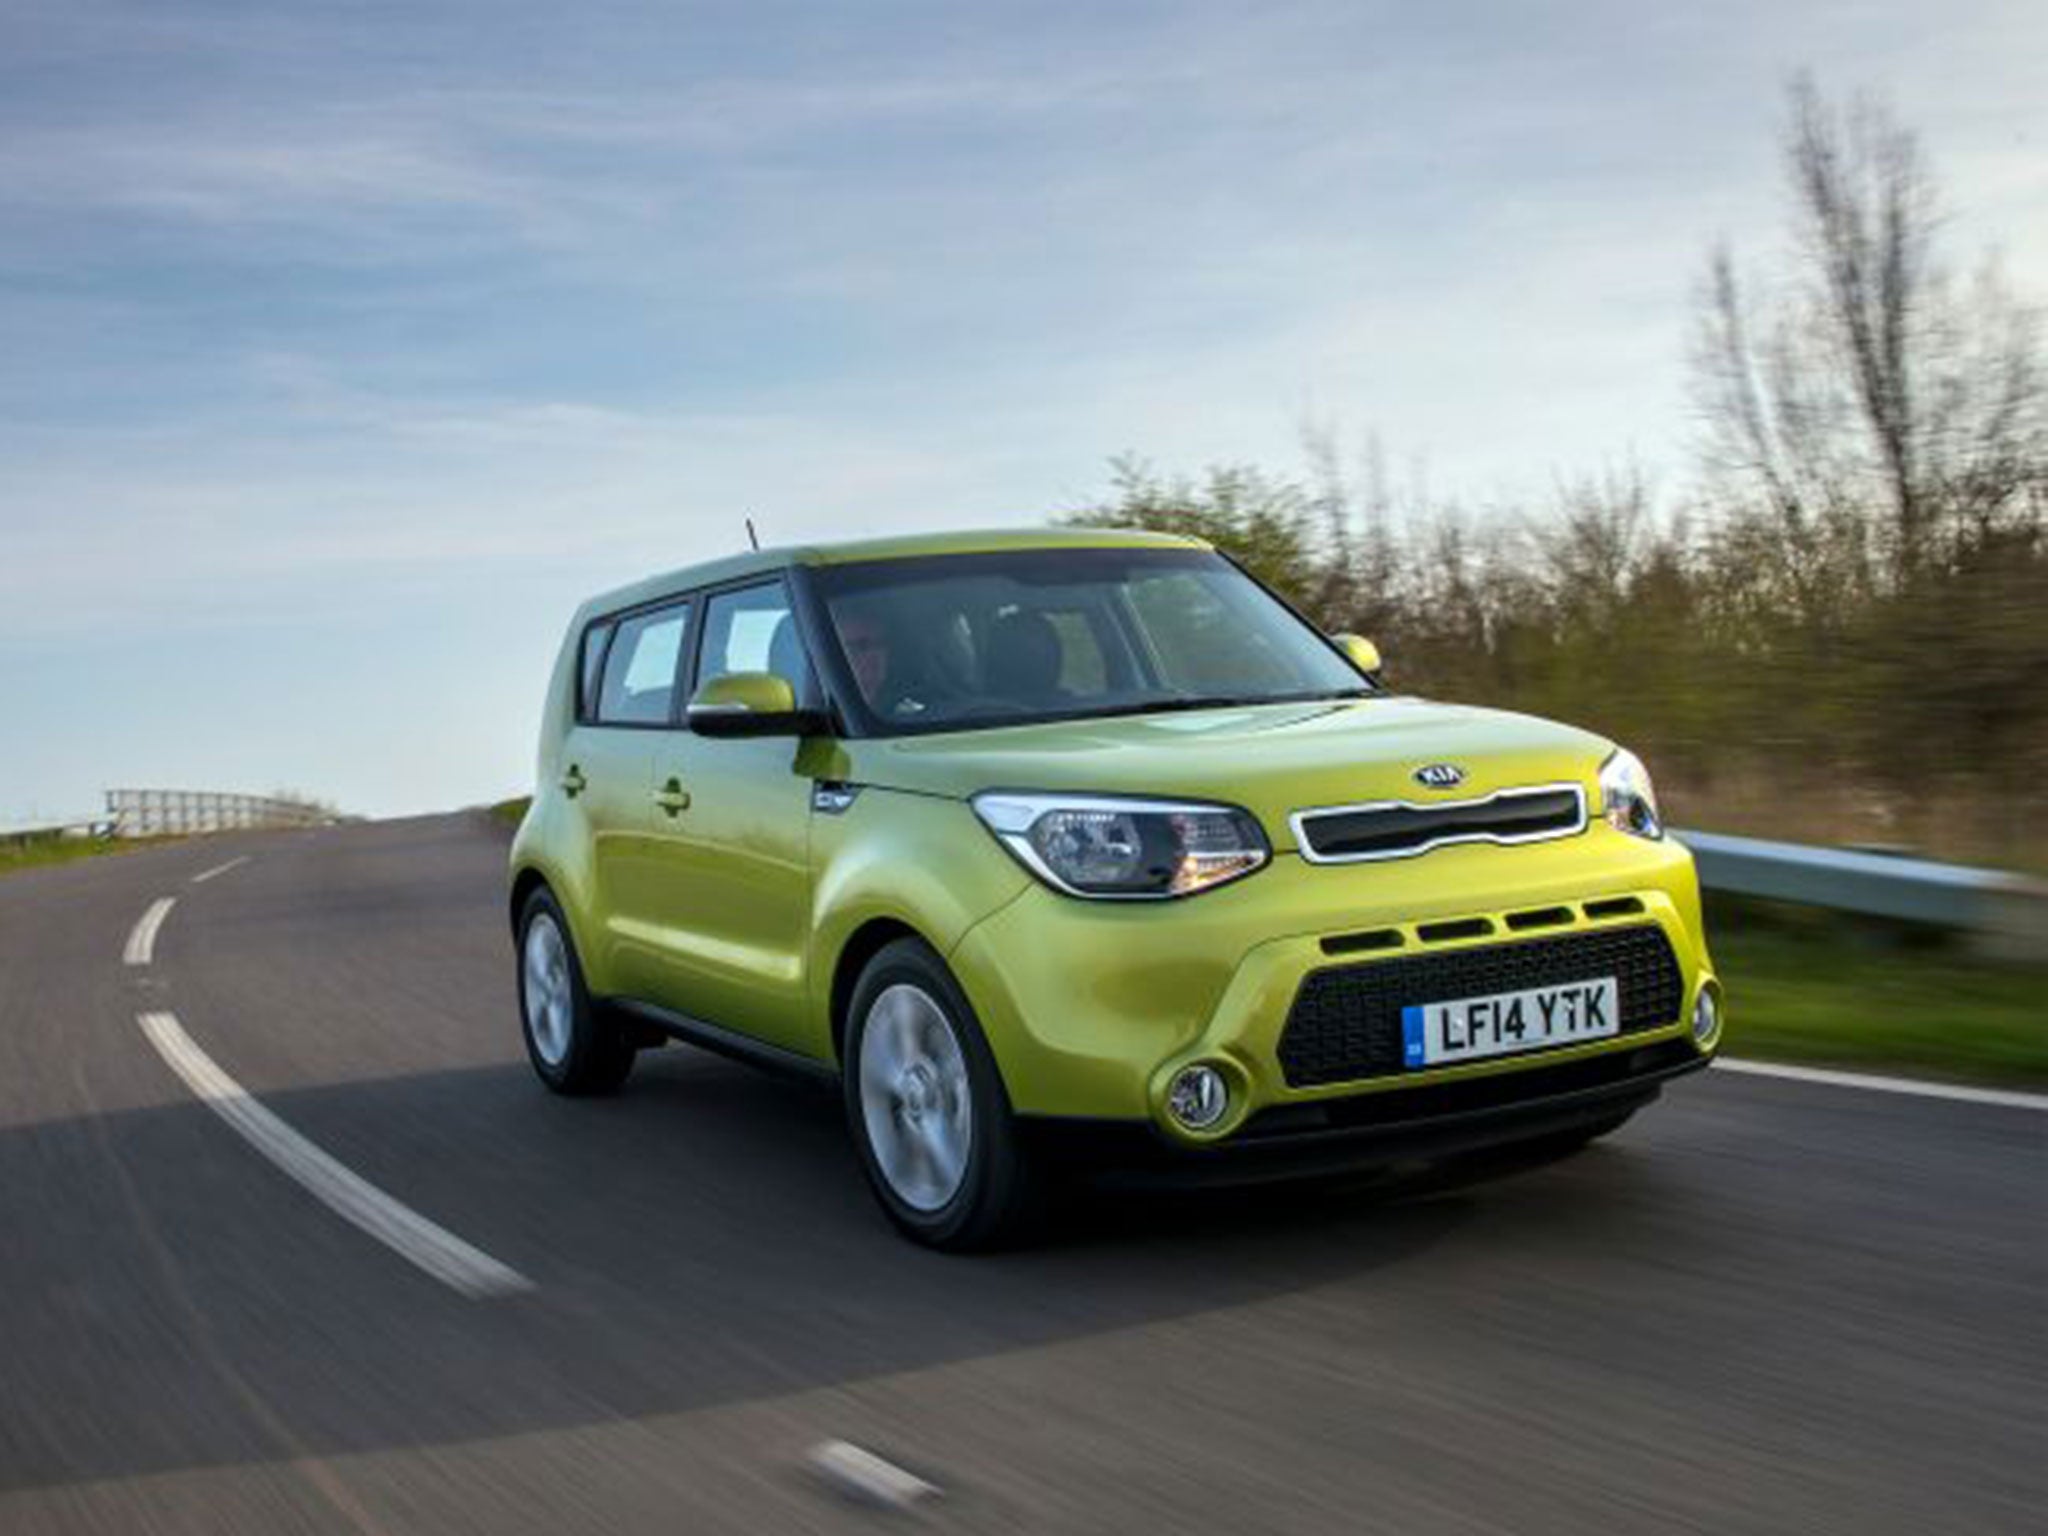 The Kia Soul must have hit every robotic arm on the ugly production line